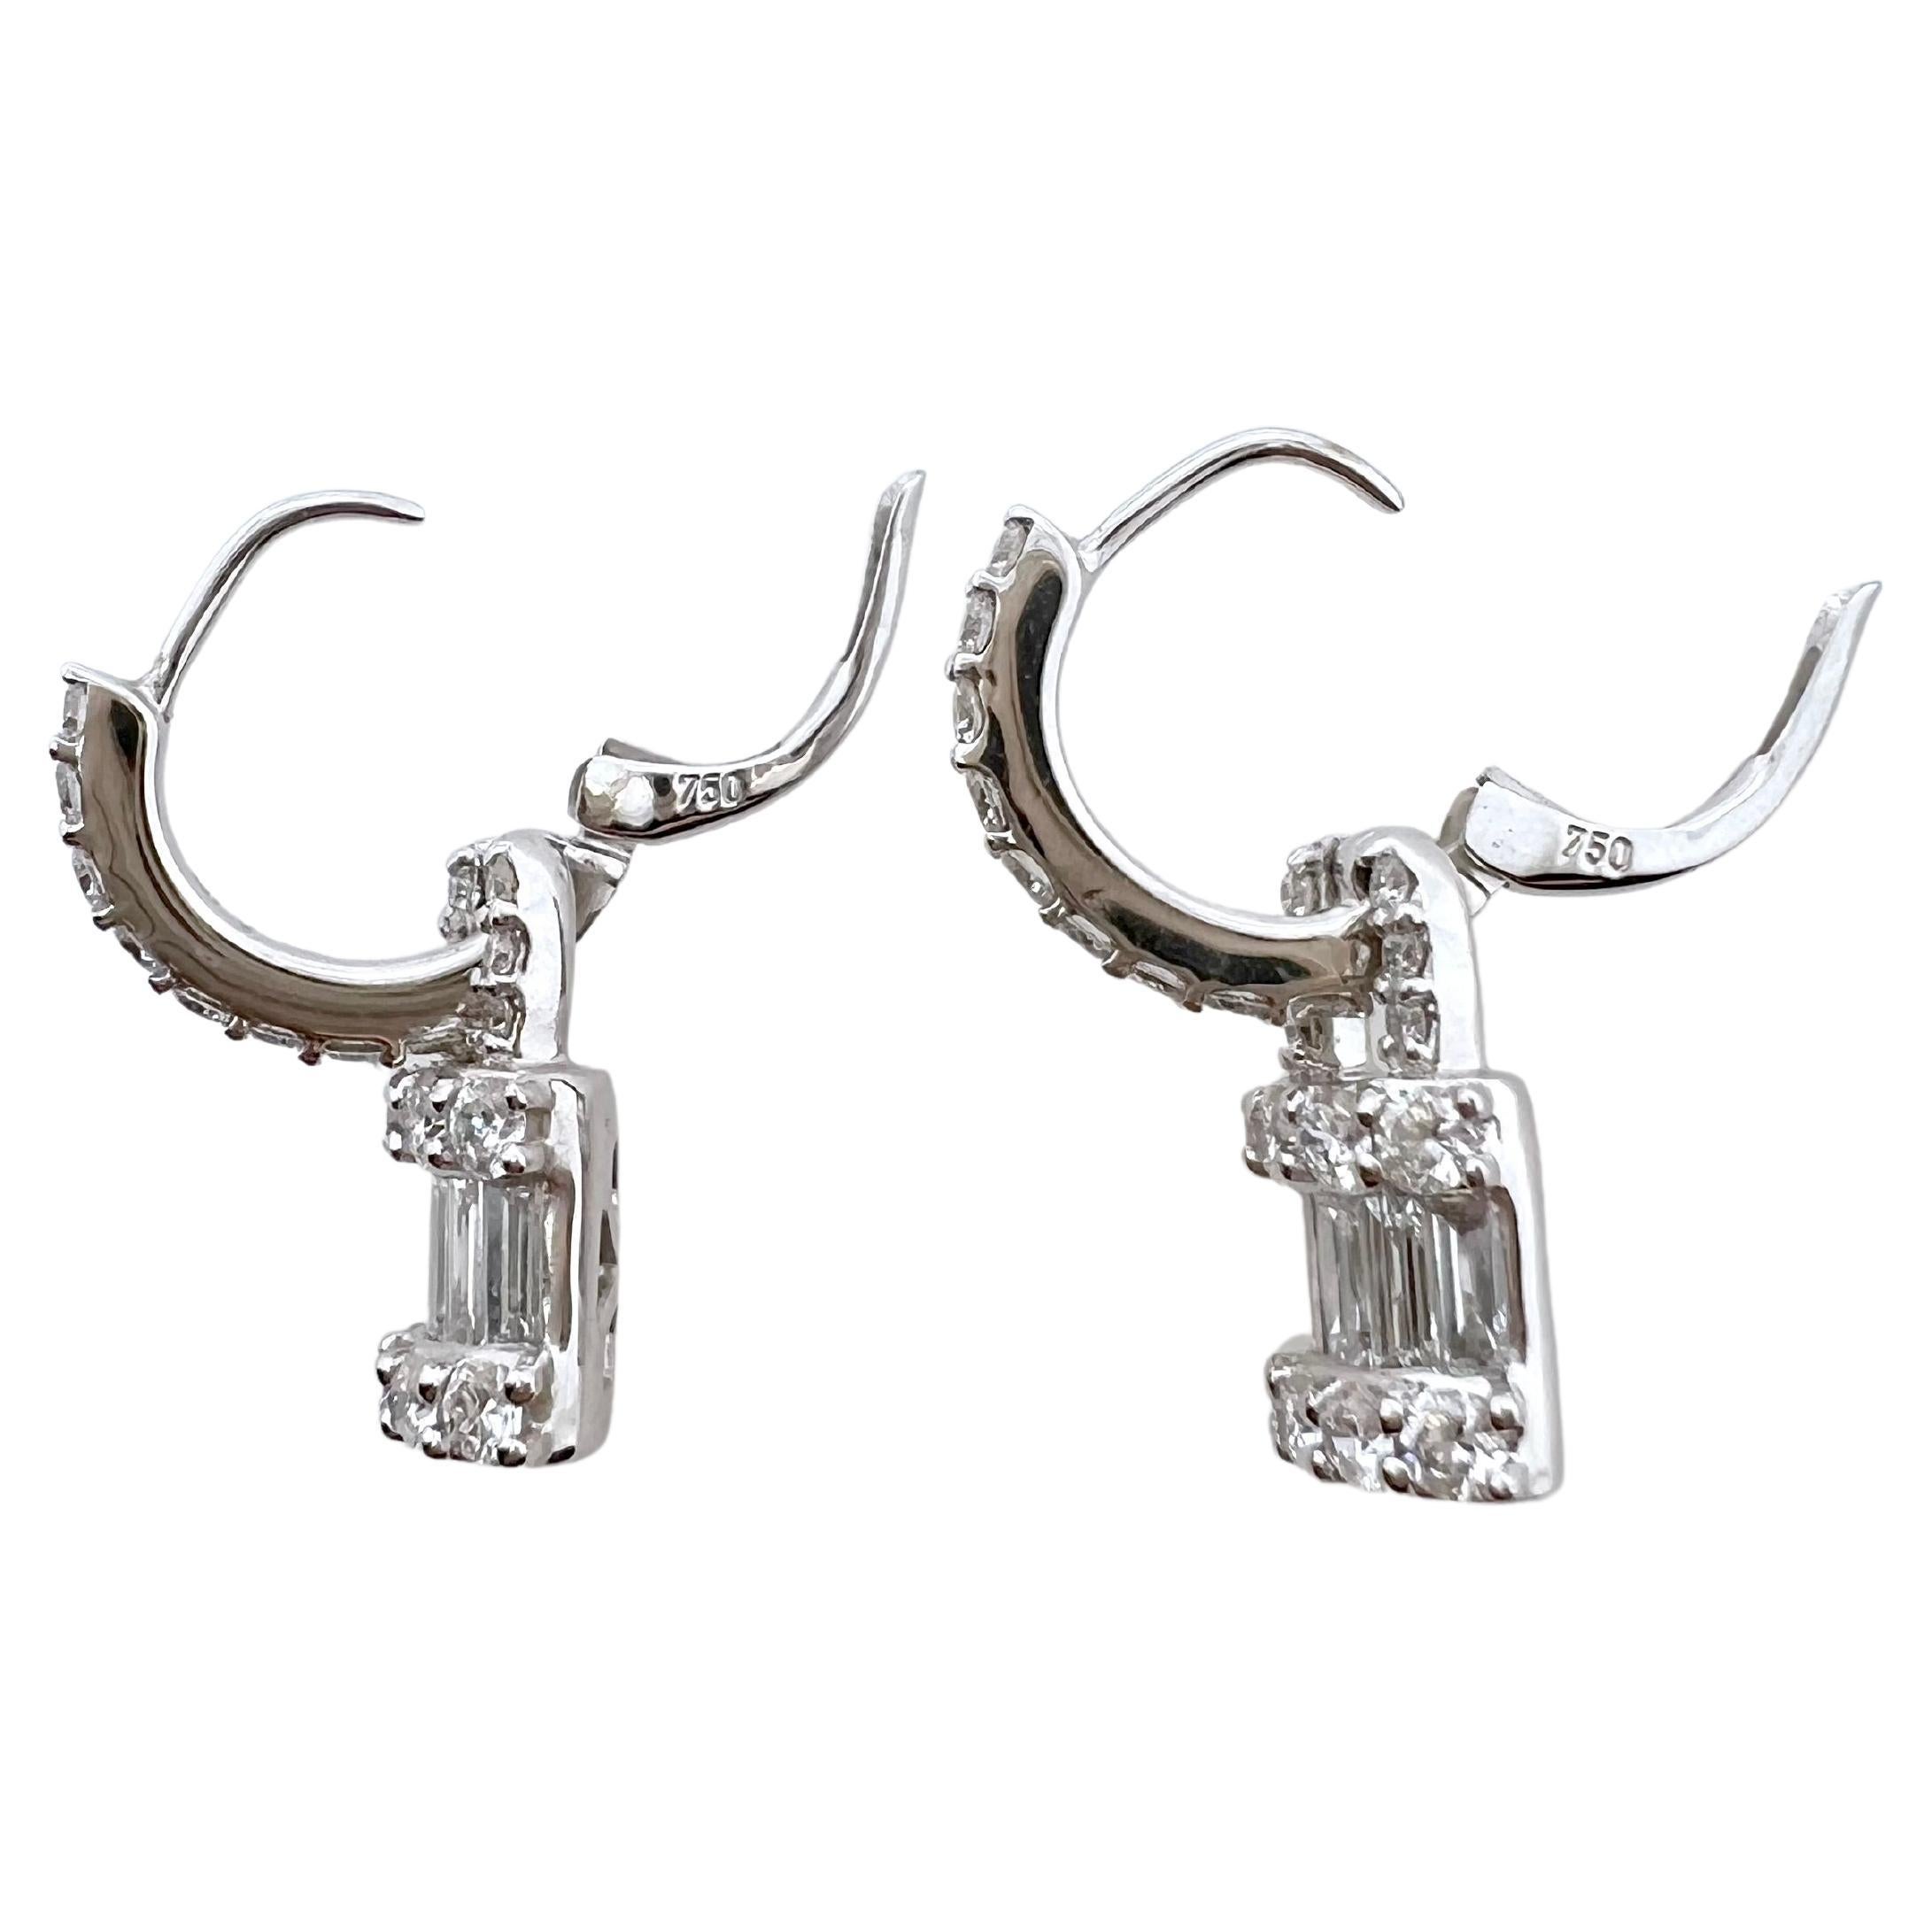 This pair of earrings are absolutely stunning and will be your favorite go to pair.  The gorgeous baguettes are channeled set amongst the round diamonds.  The lock design dangle from the upper hoop to make it have some movement and more playful